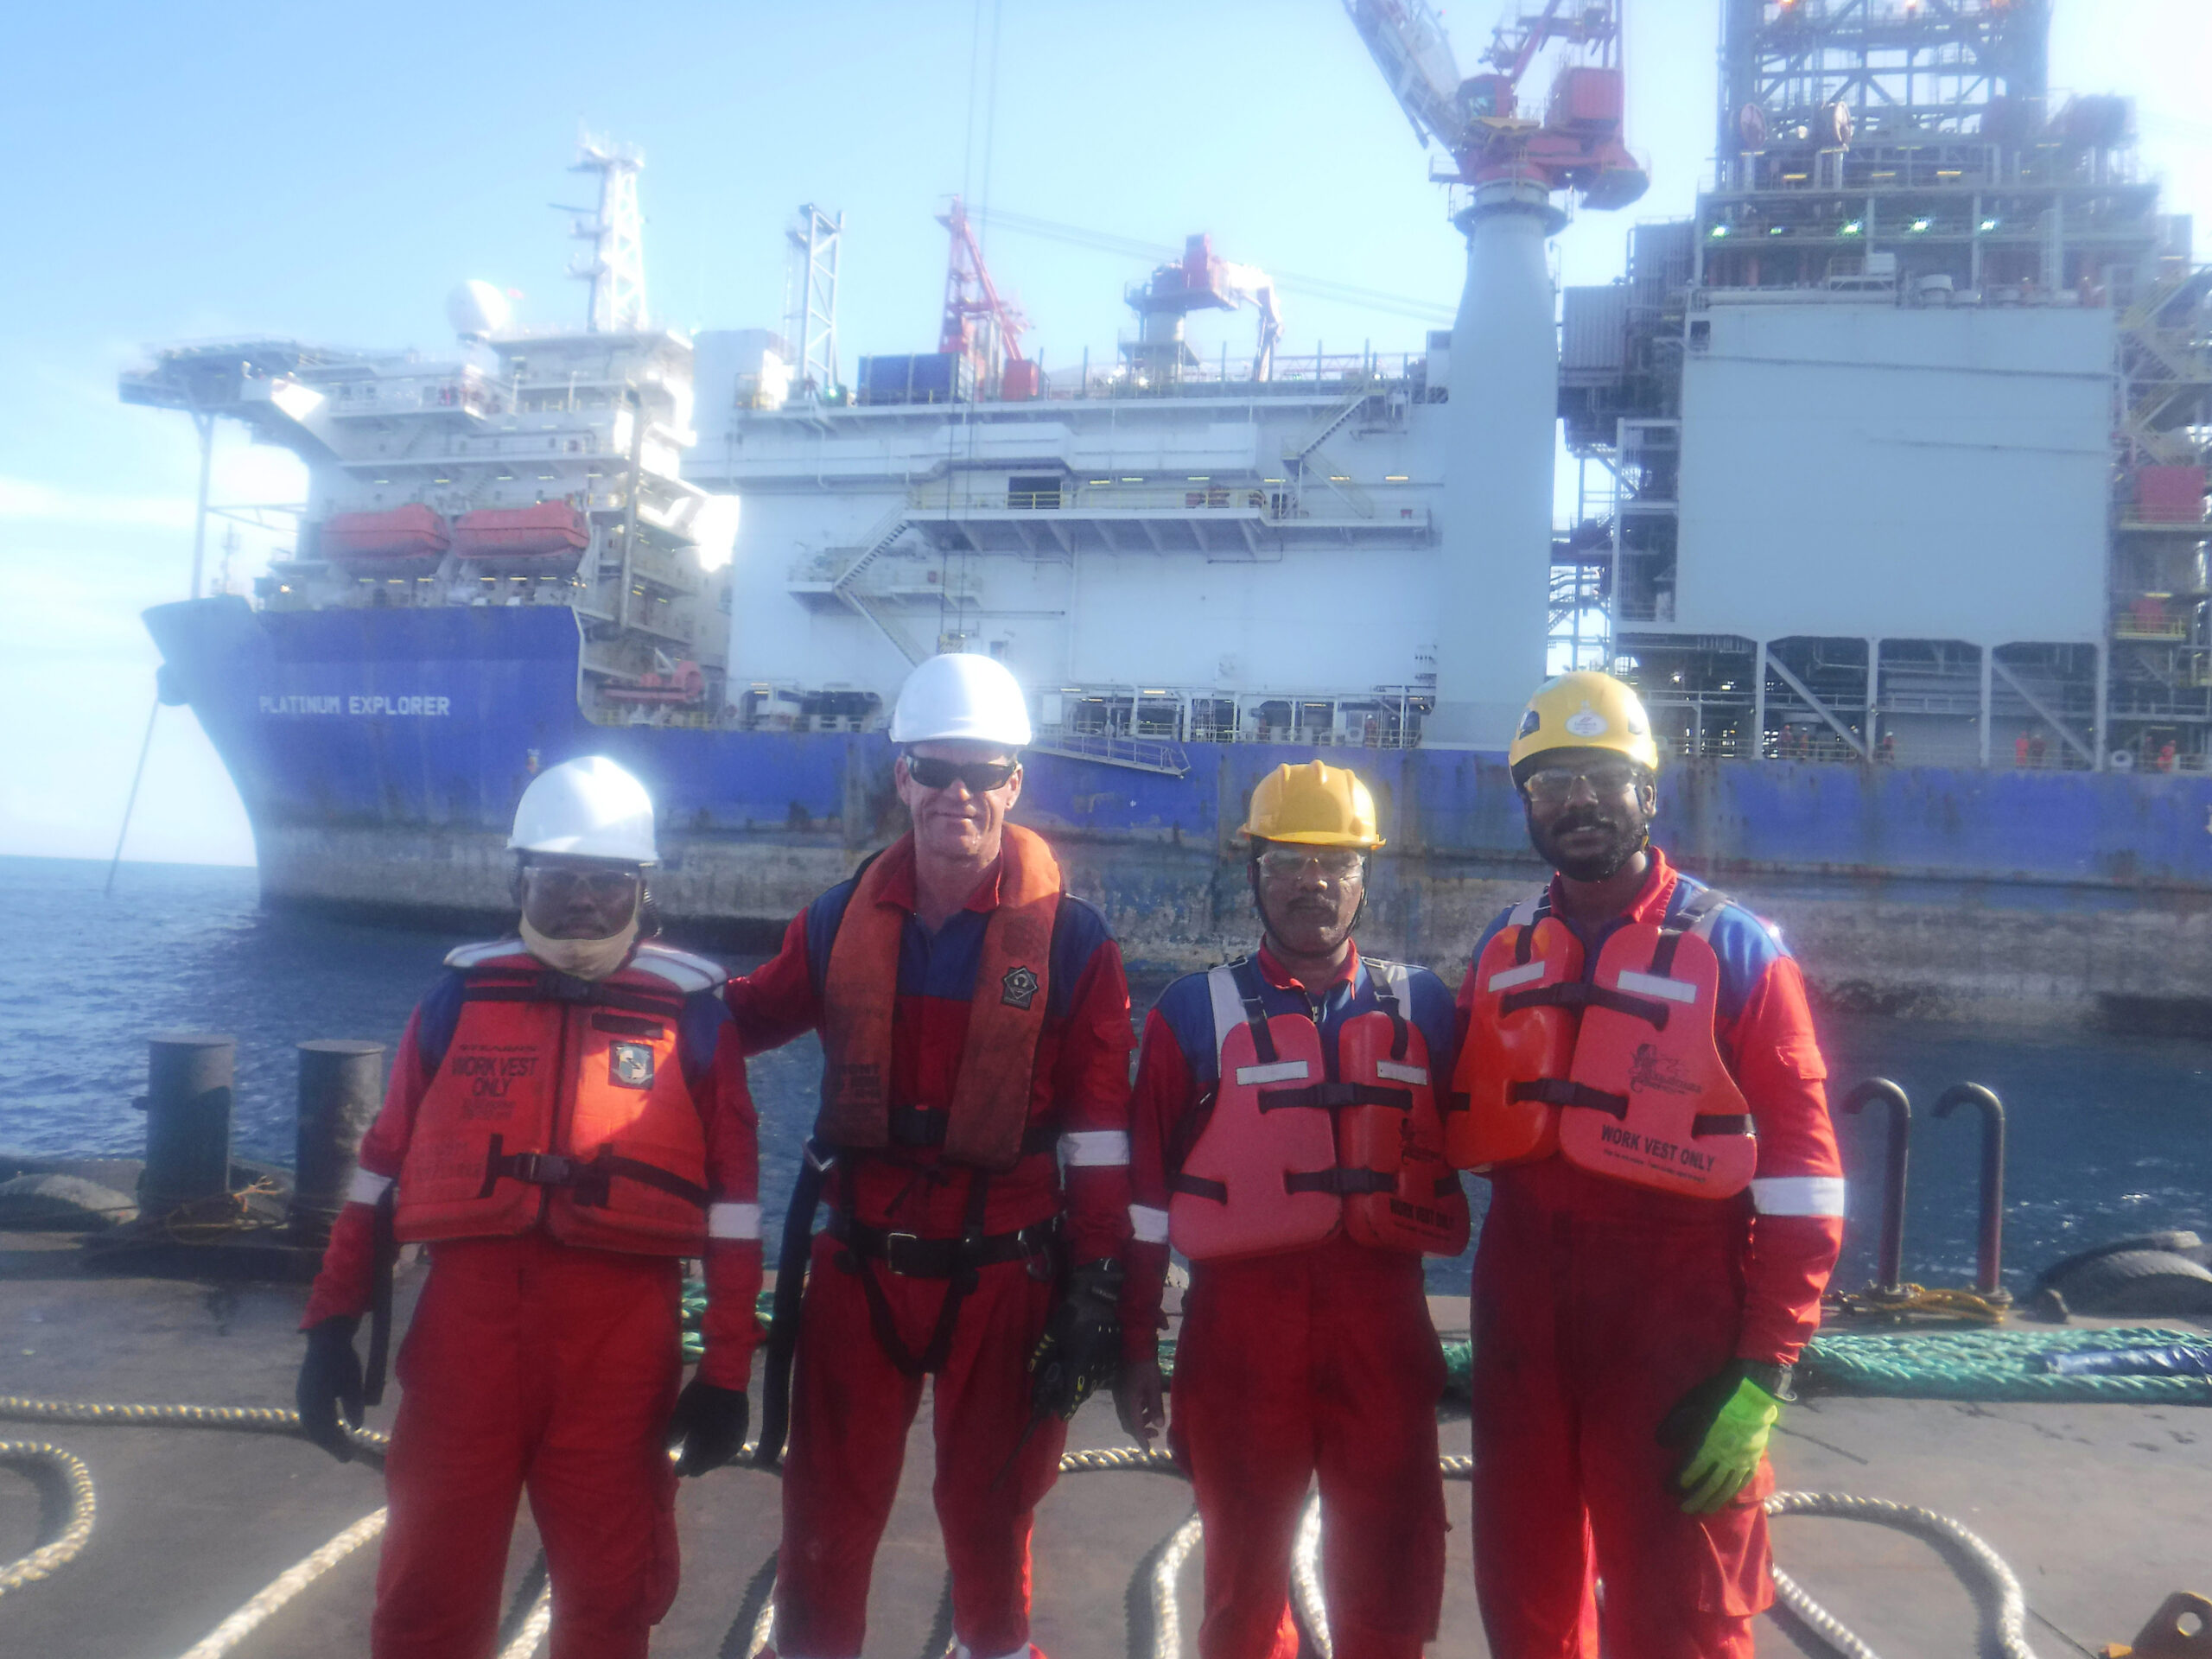 Axess’ engineers with Platinum Explorer in the background